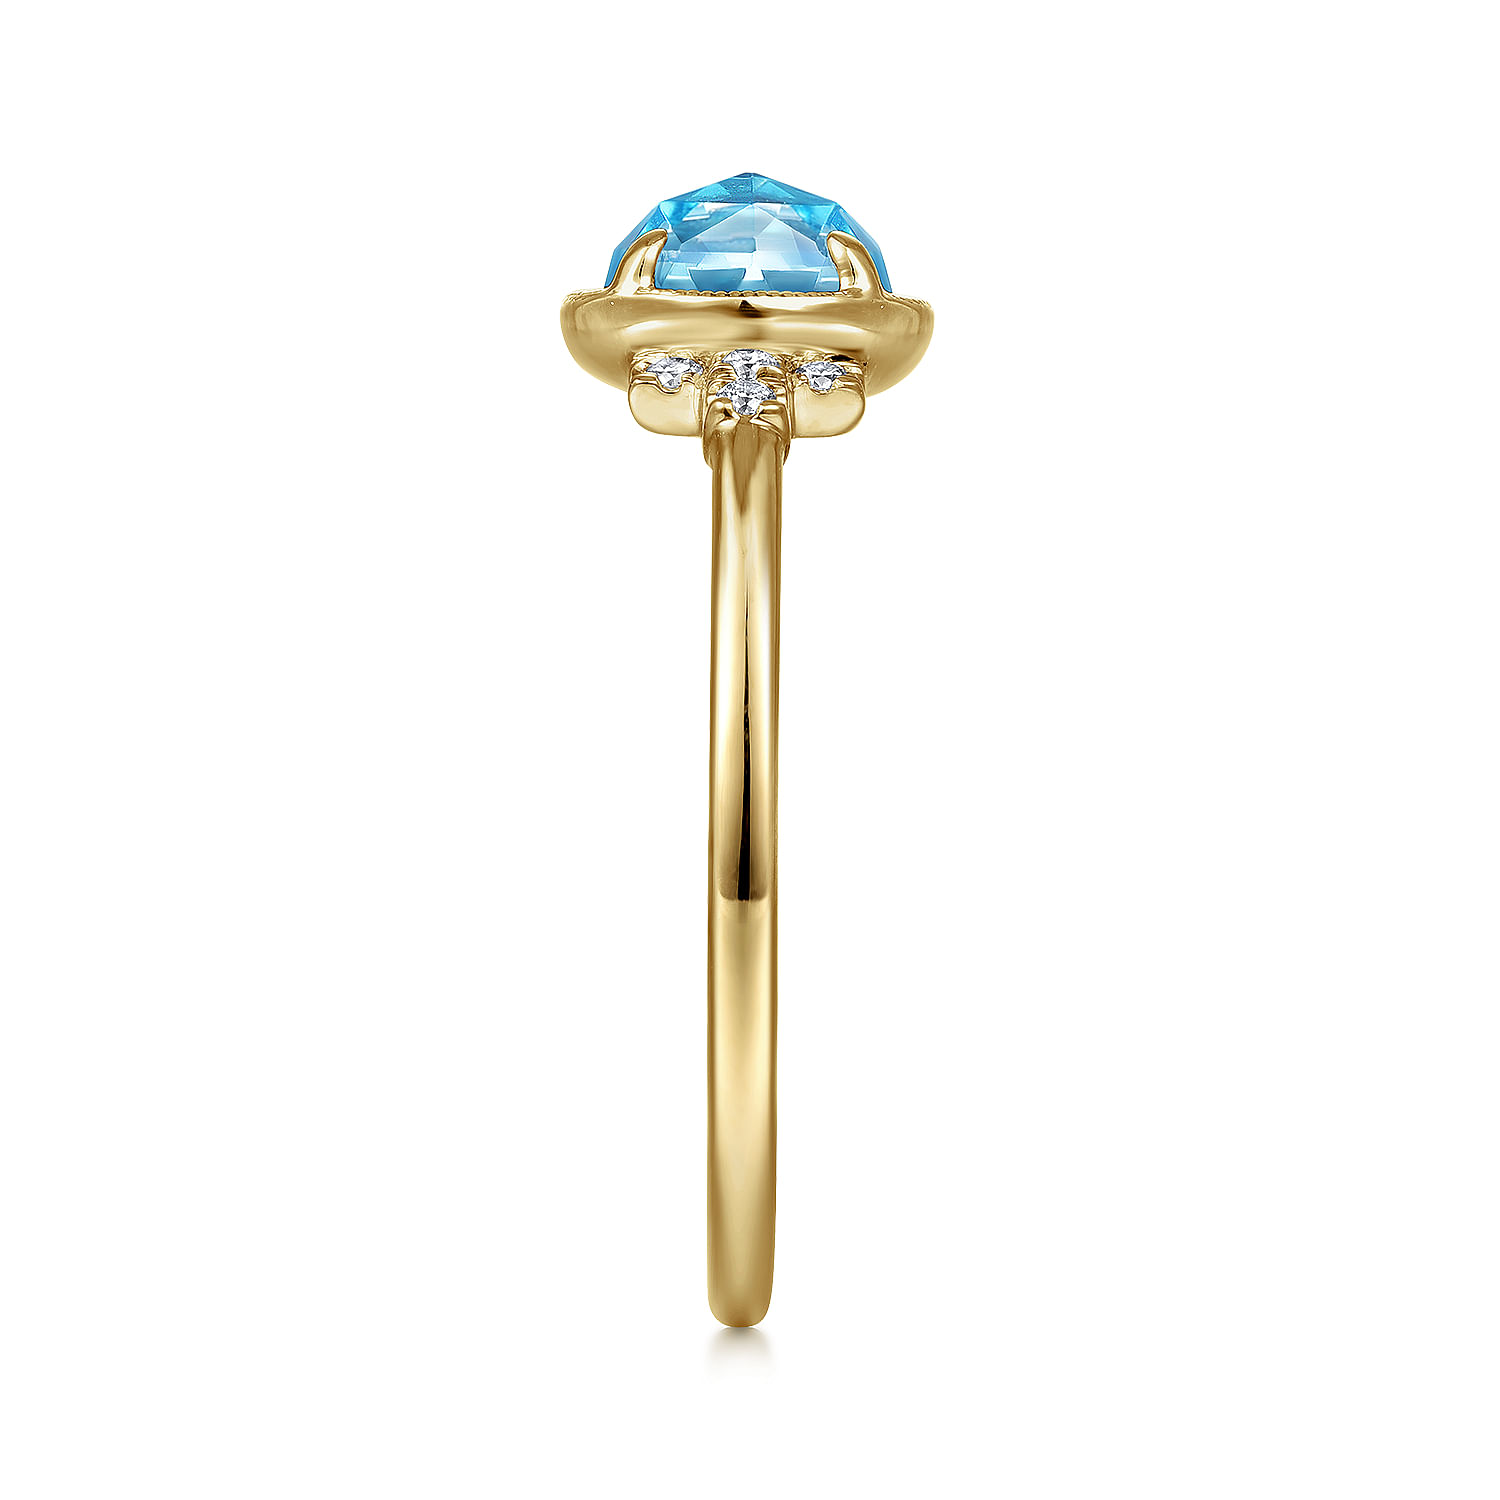 14K Yellow Gold Round Bezel Set Blue Topaz Ring with Diamond Side Accents